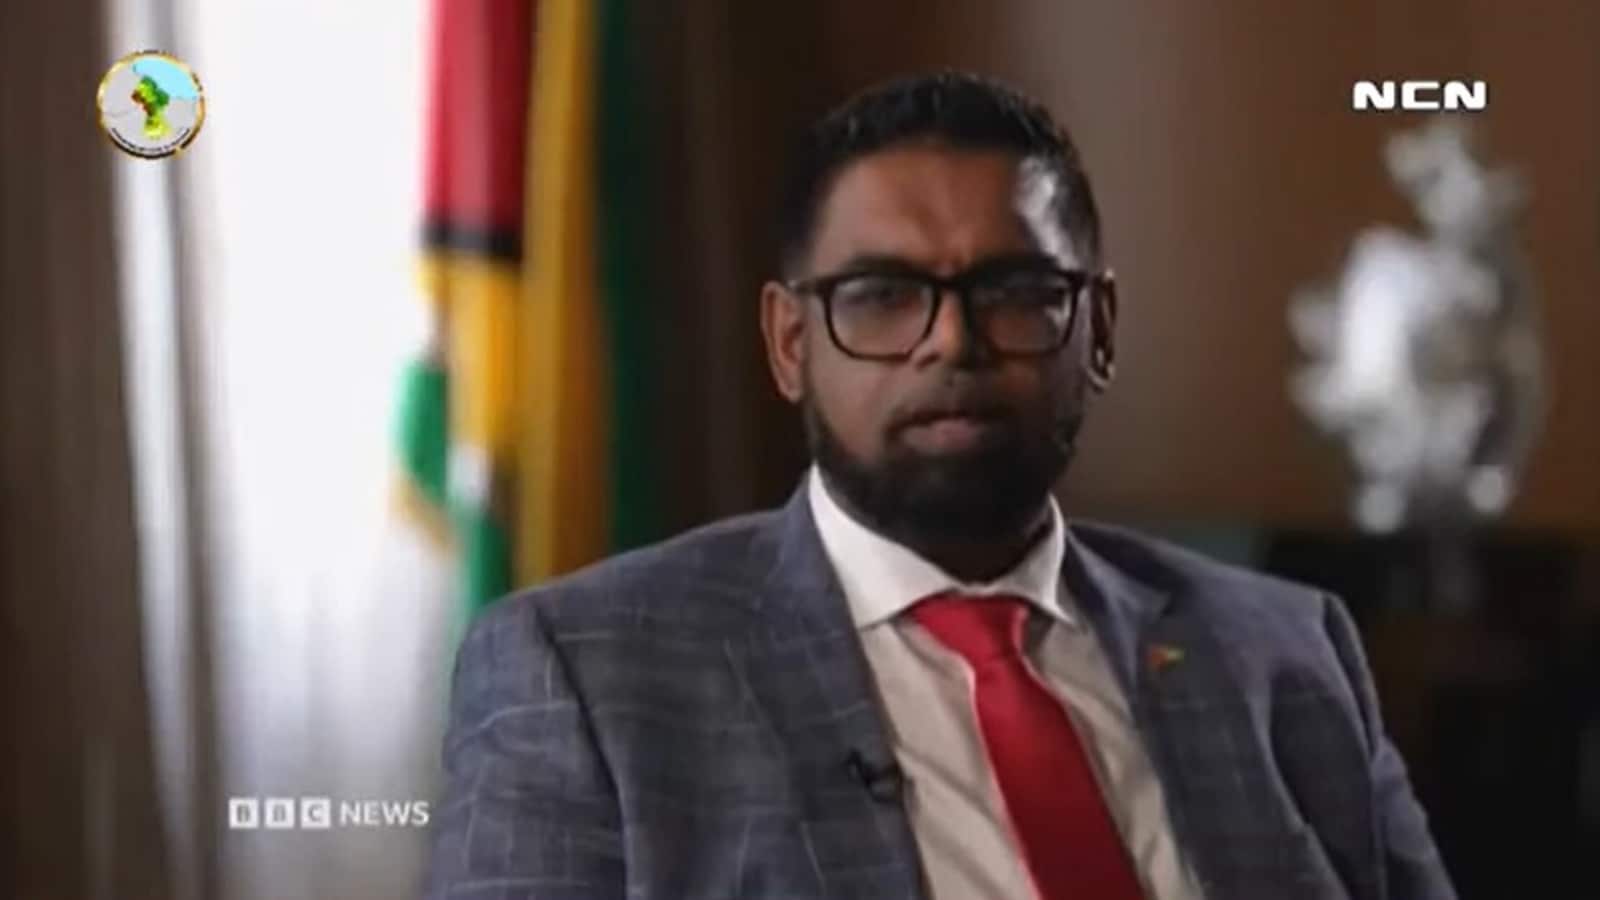 Guyanese President says 'I would lecture you on climate change' to BBC journalist when discussing country's oil reserve